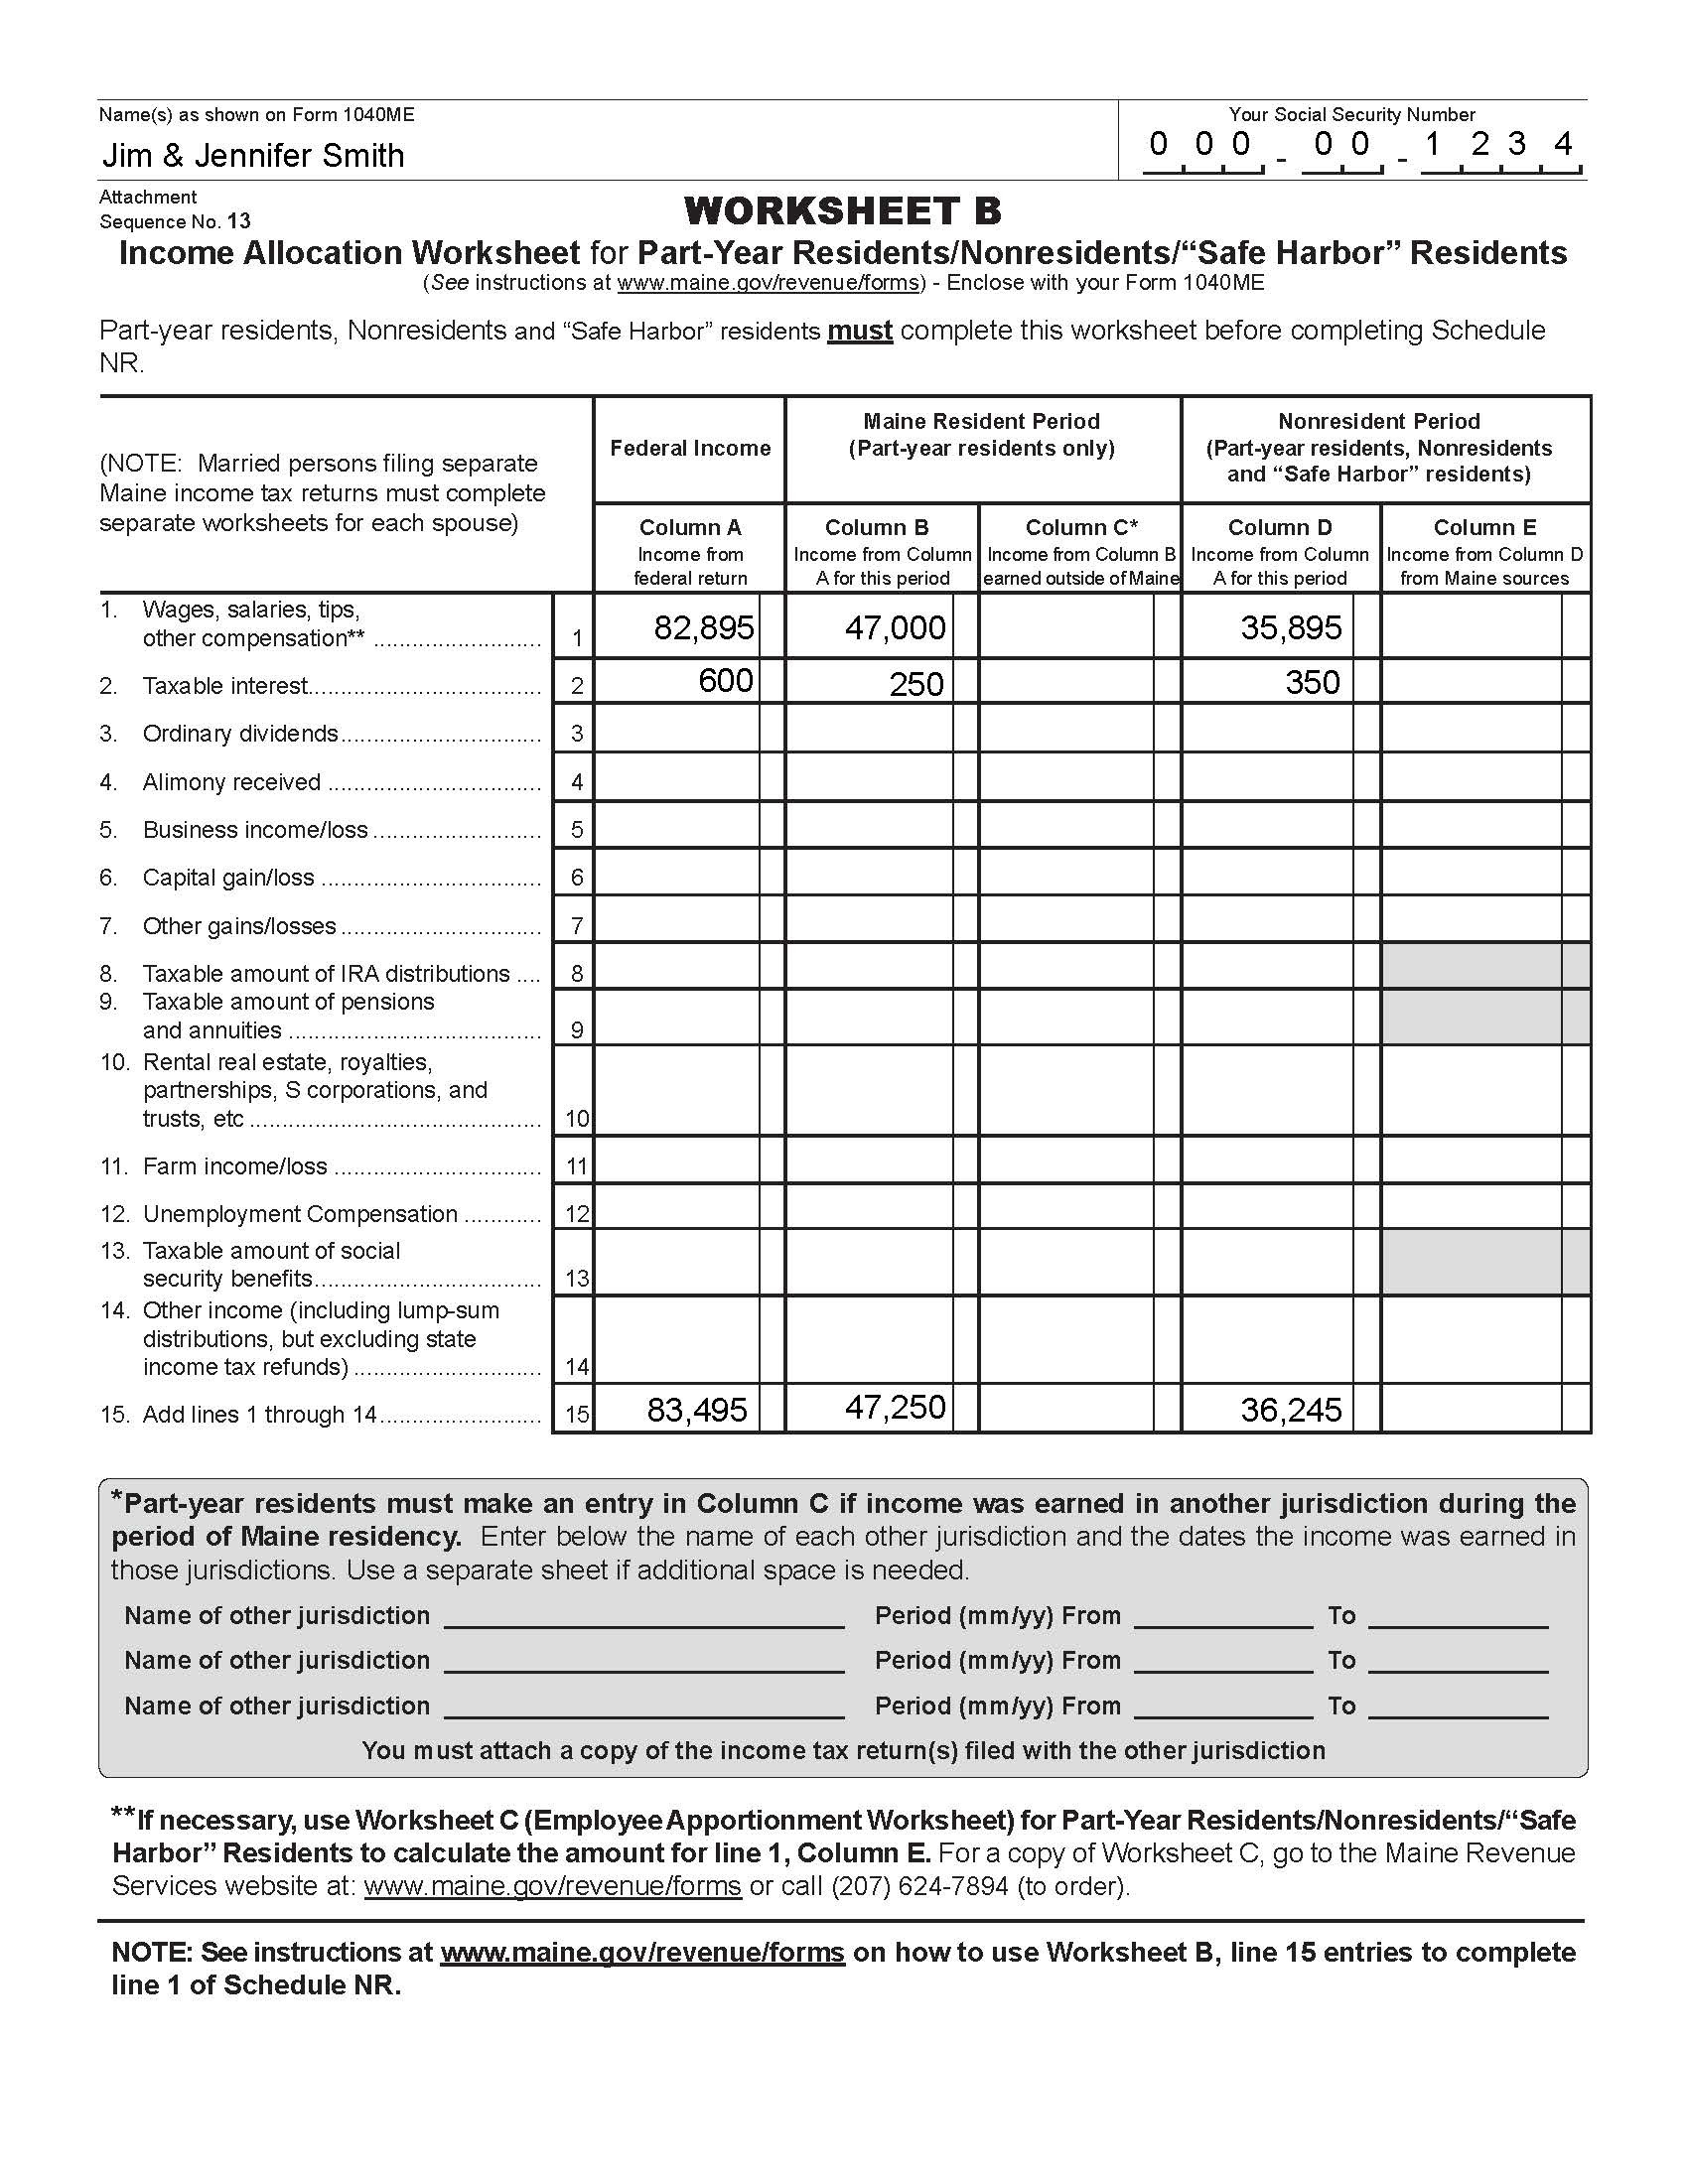 Federal Income Tax Worksheet Db excel